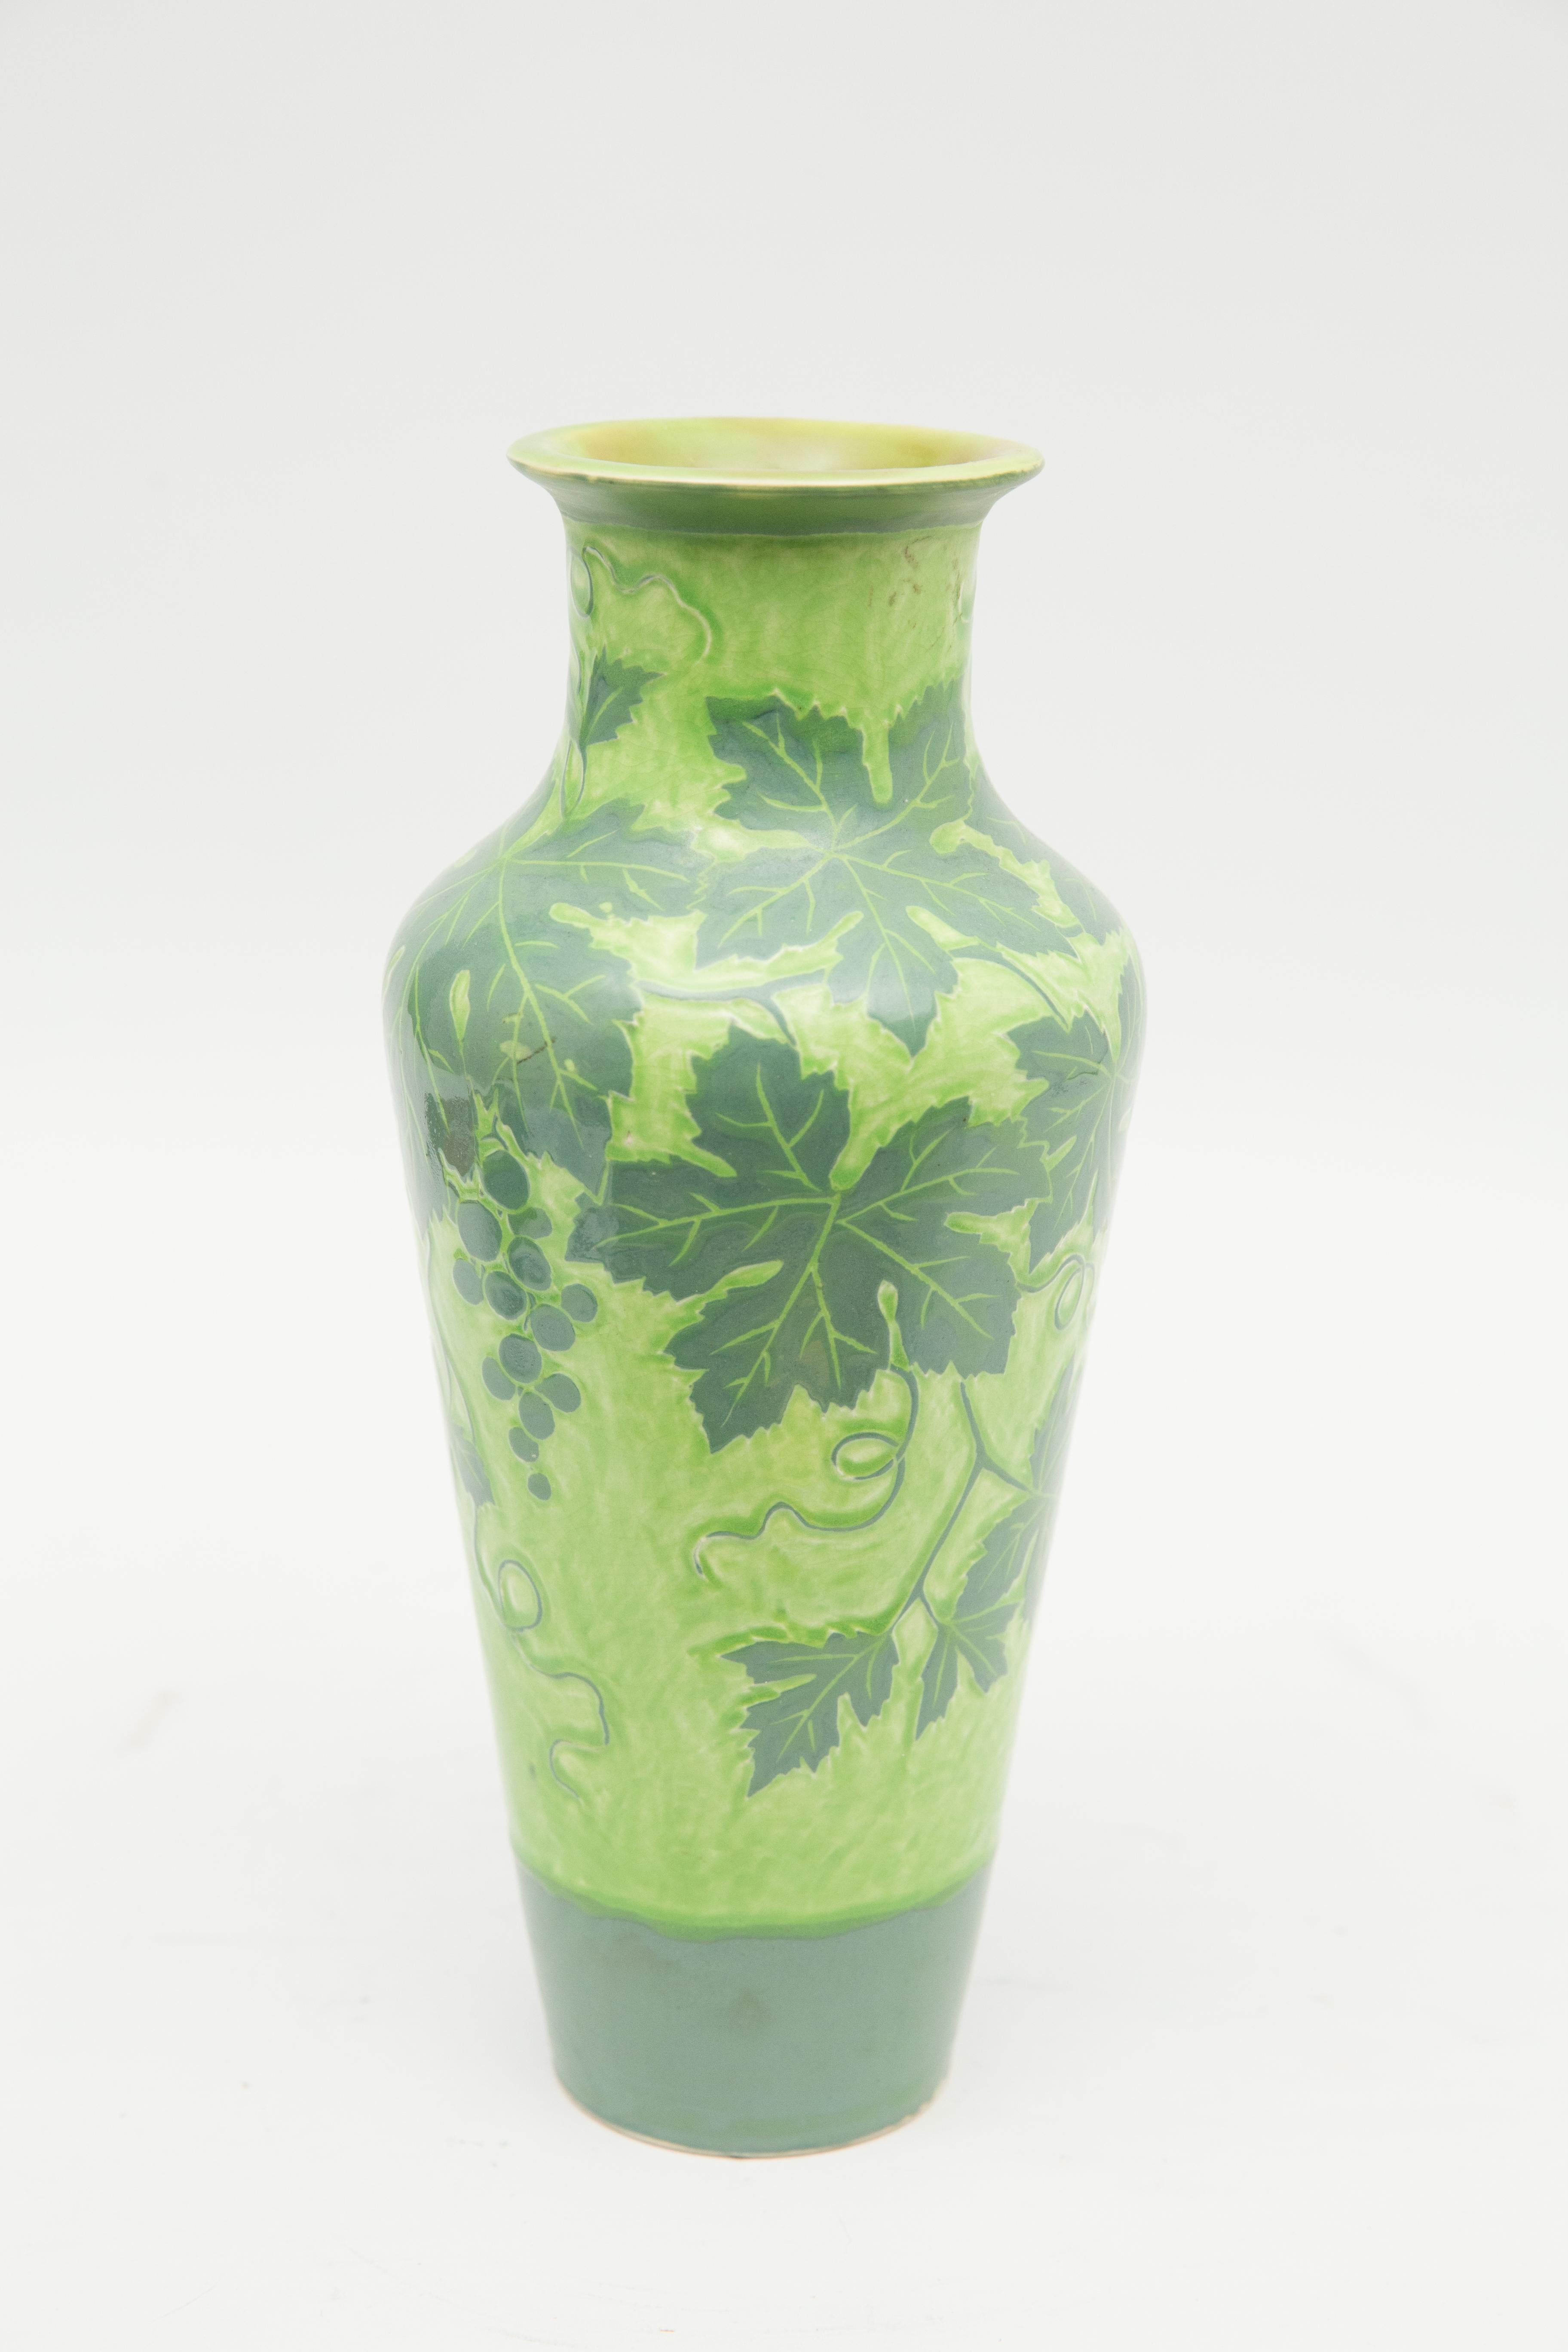 Offered is a fine example of Art Nouveau Gustavsberg’s Scraffito art pottery. The vase is cut back in curvilinear form maple leaf motif. The vase was designed by Scraffito is made by applying layers of tinted clay in contrasting colors to a